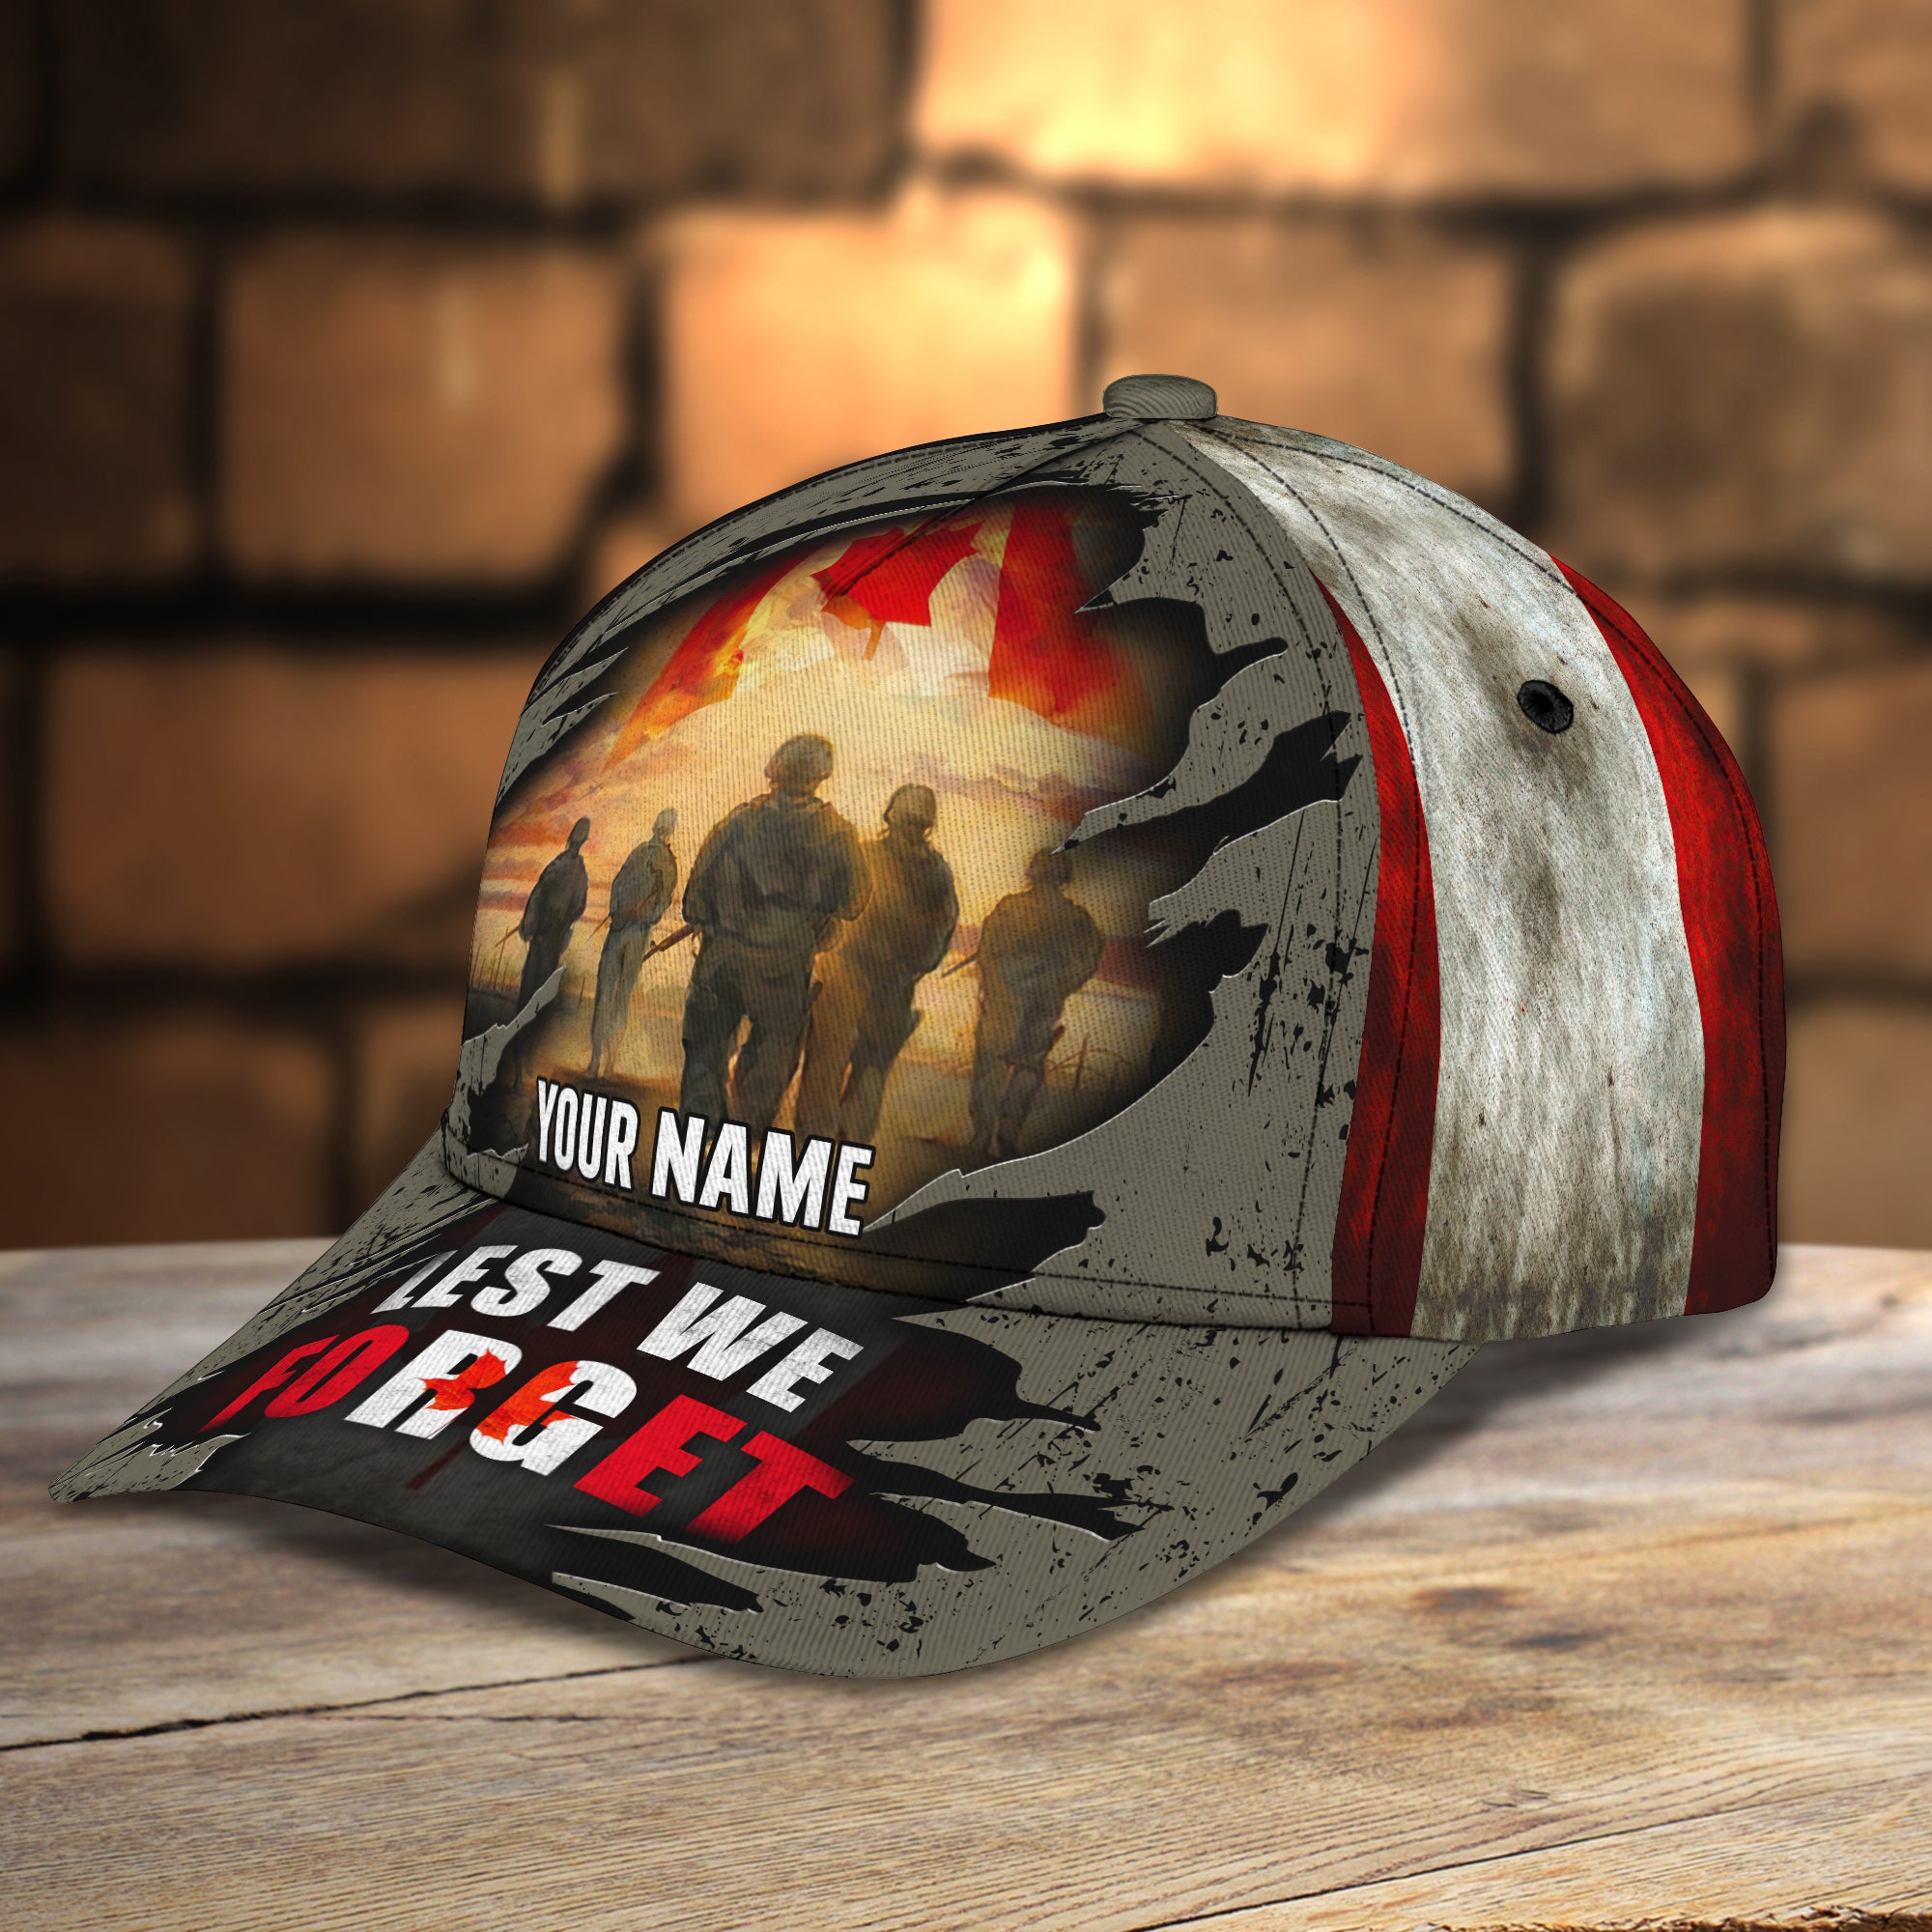 Lest We Forget - Personalized Name Cap 58 - Nvc97